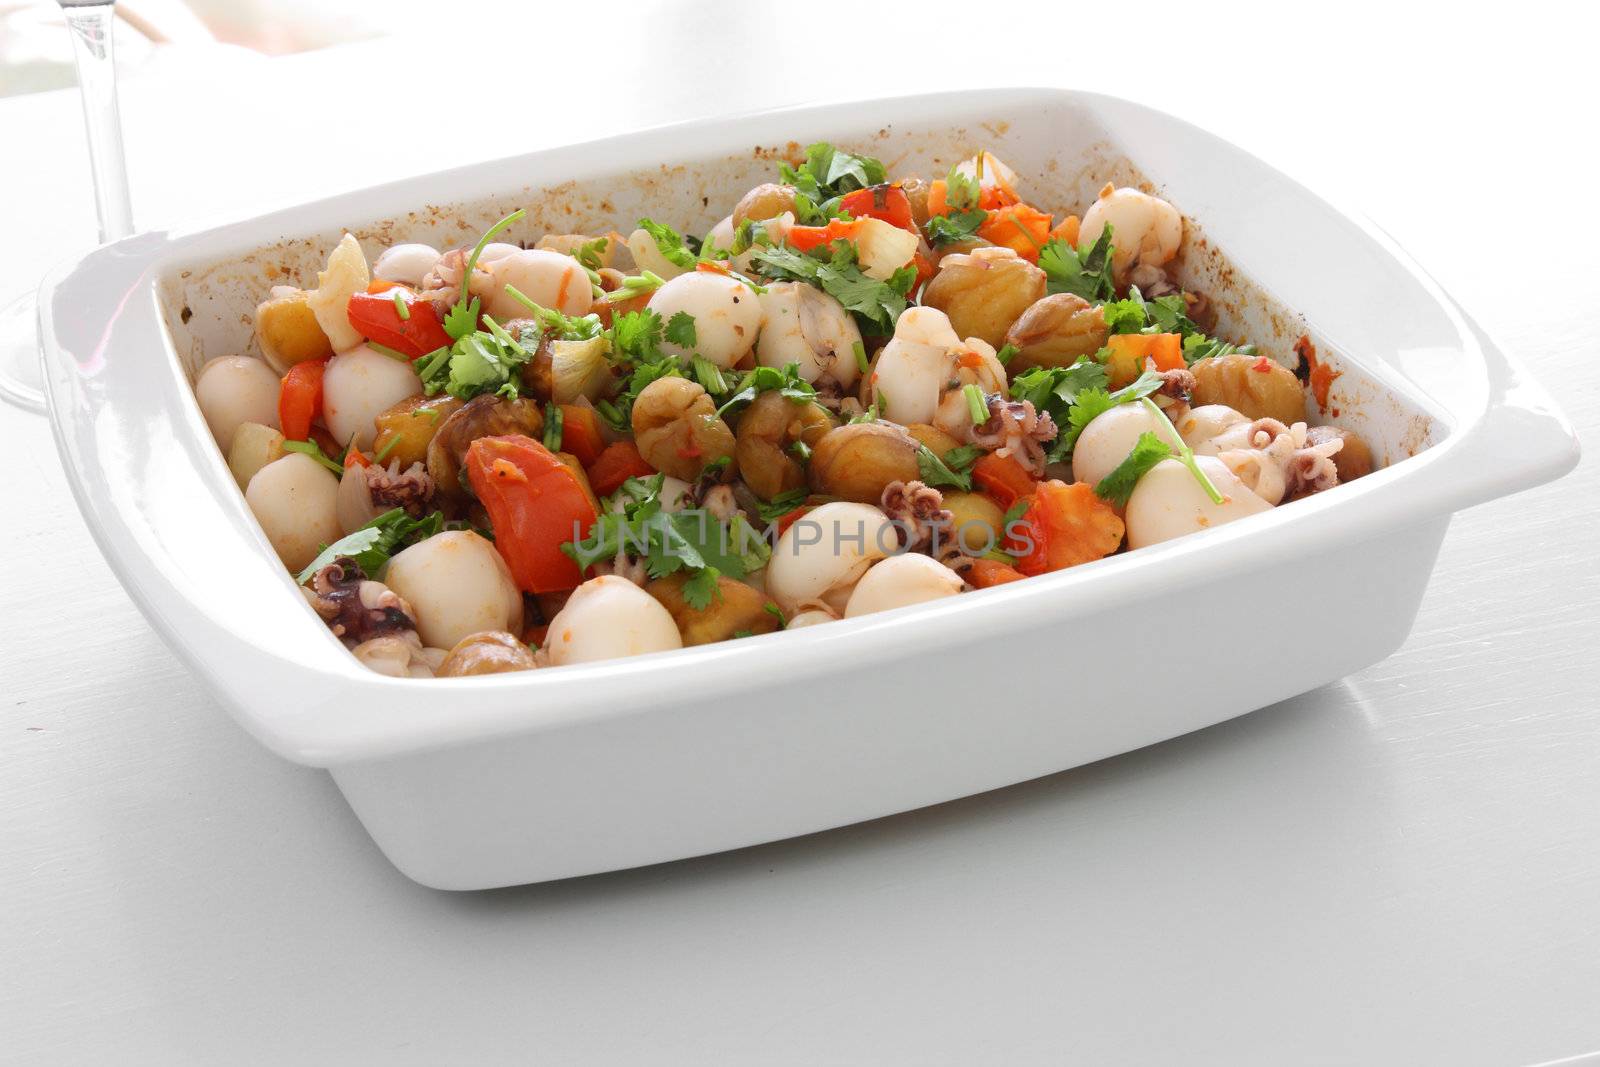 Cuttlefish dish with chestnuts and tomatoes.